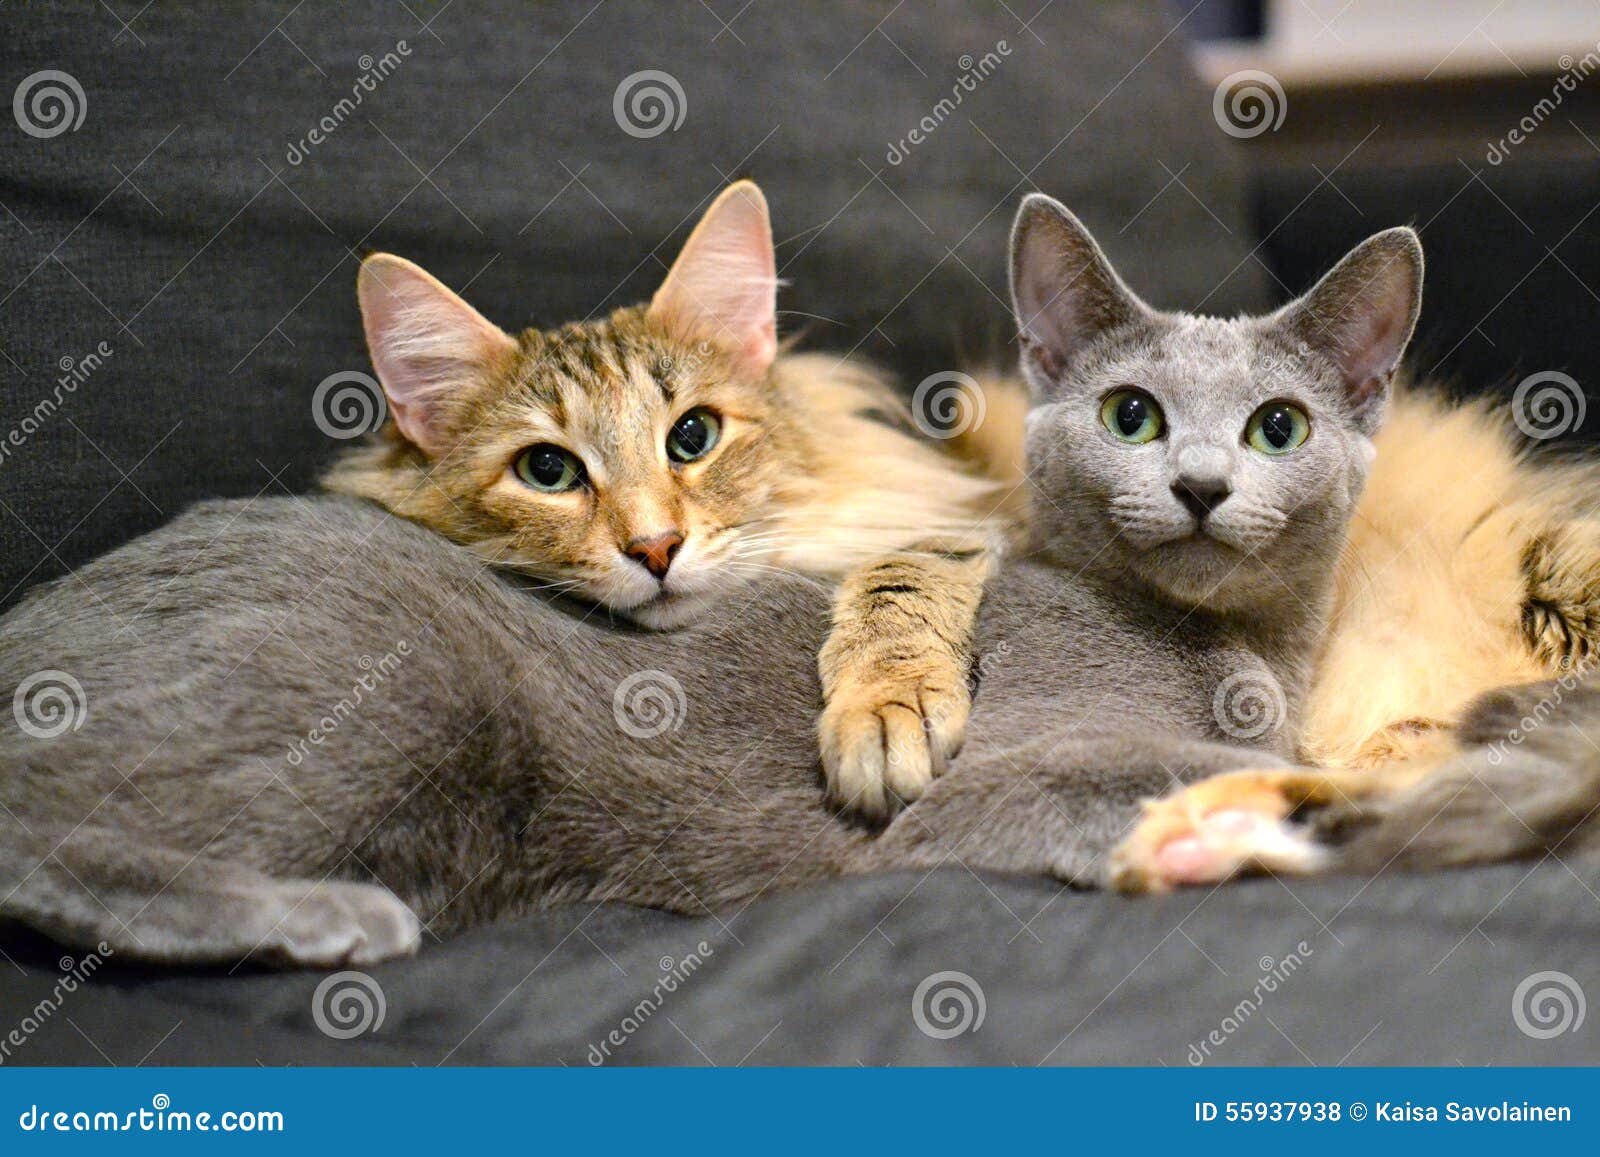 Russian Blue and Norwegian Forest Cat Stock Photo - Image of cats ...